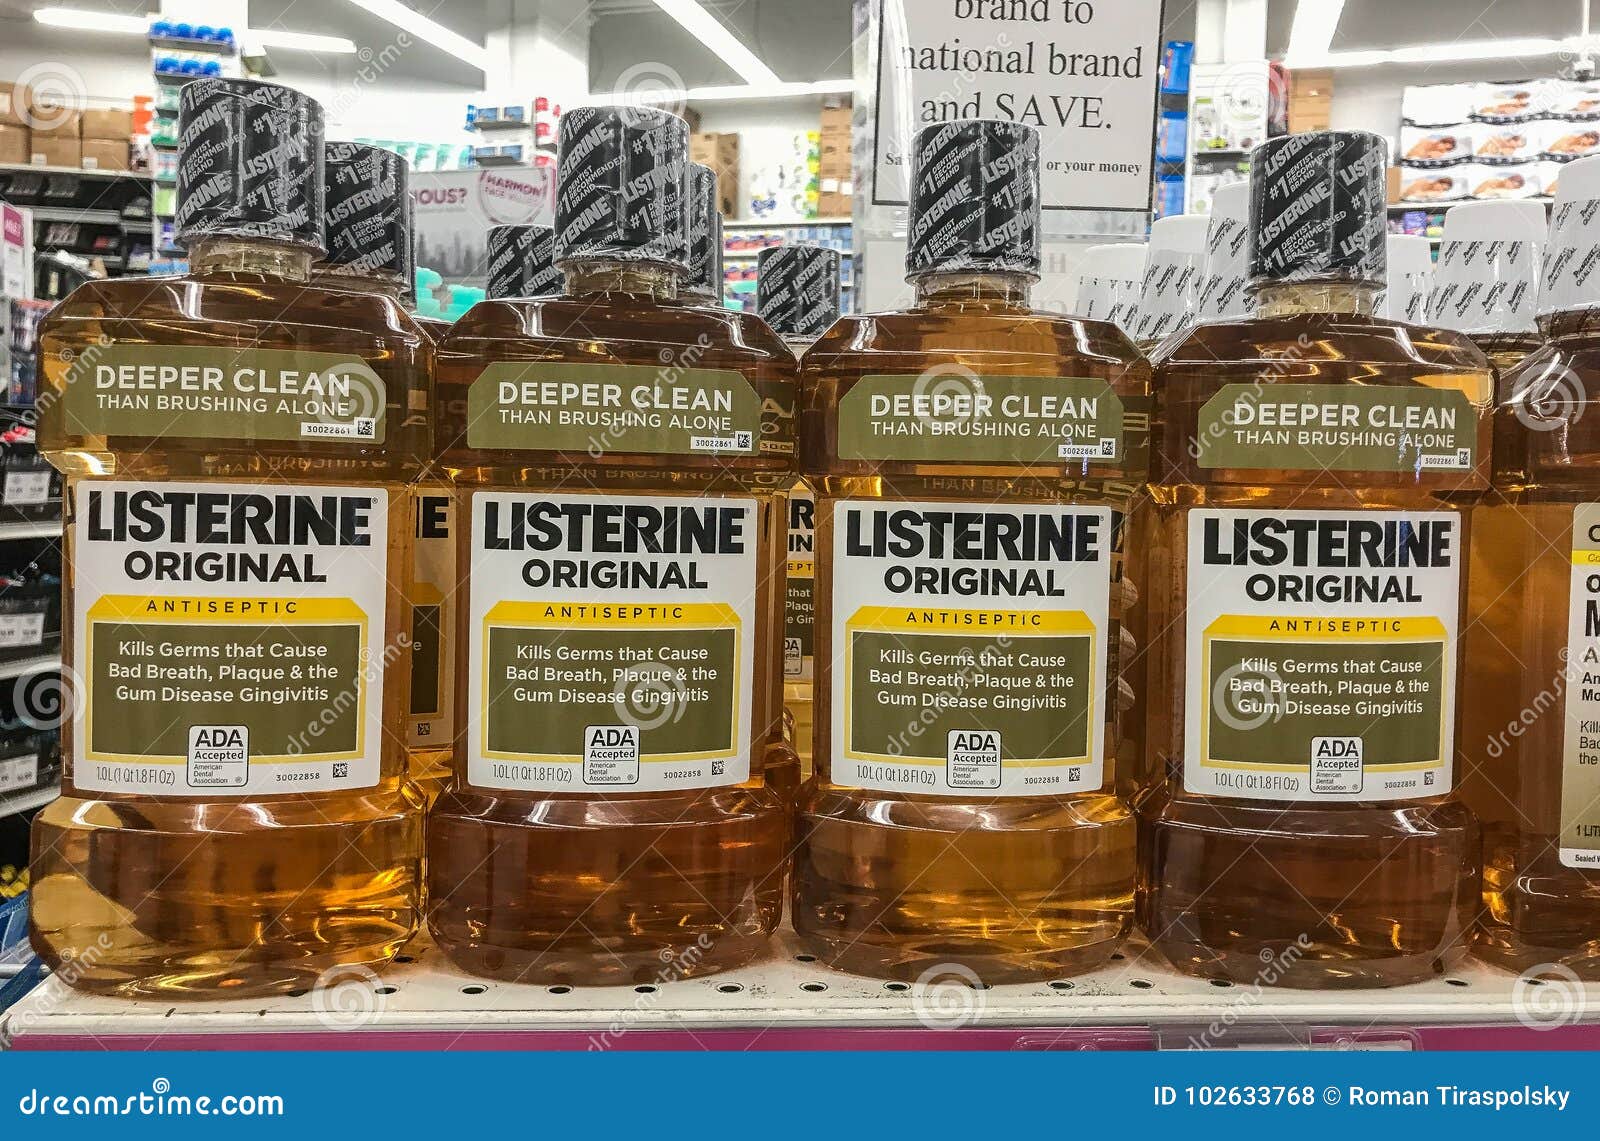 Brown listerine editorial stock photo. Image of sale - 102633768